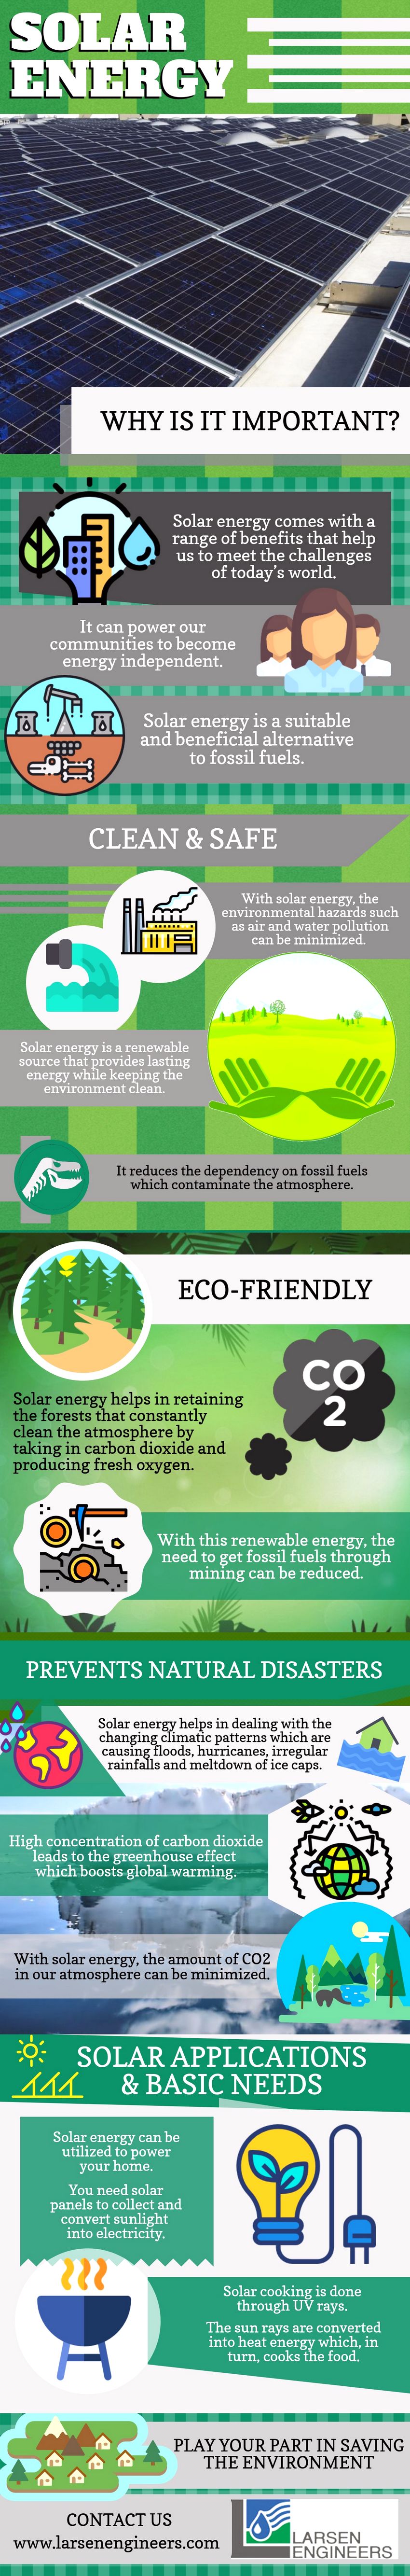 solar energy infographic growth projections